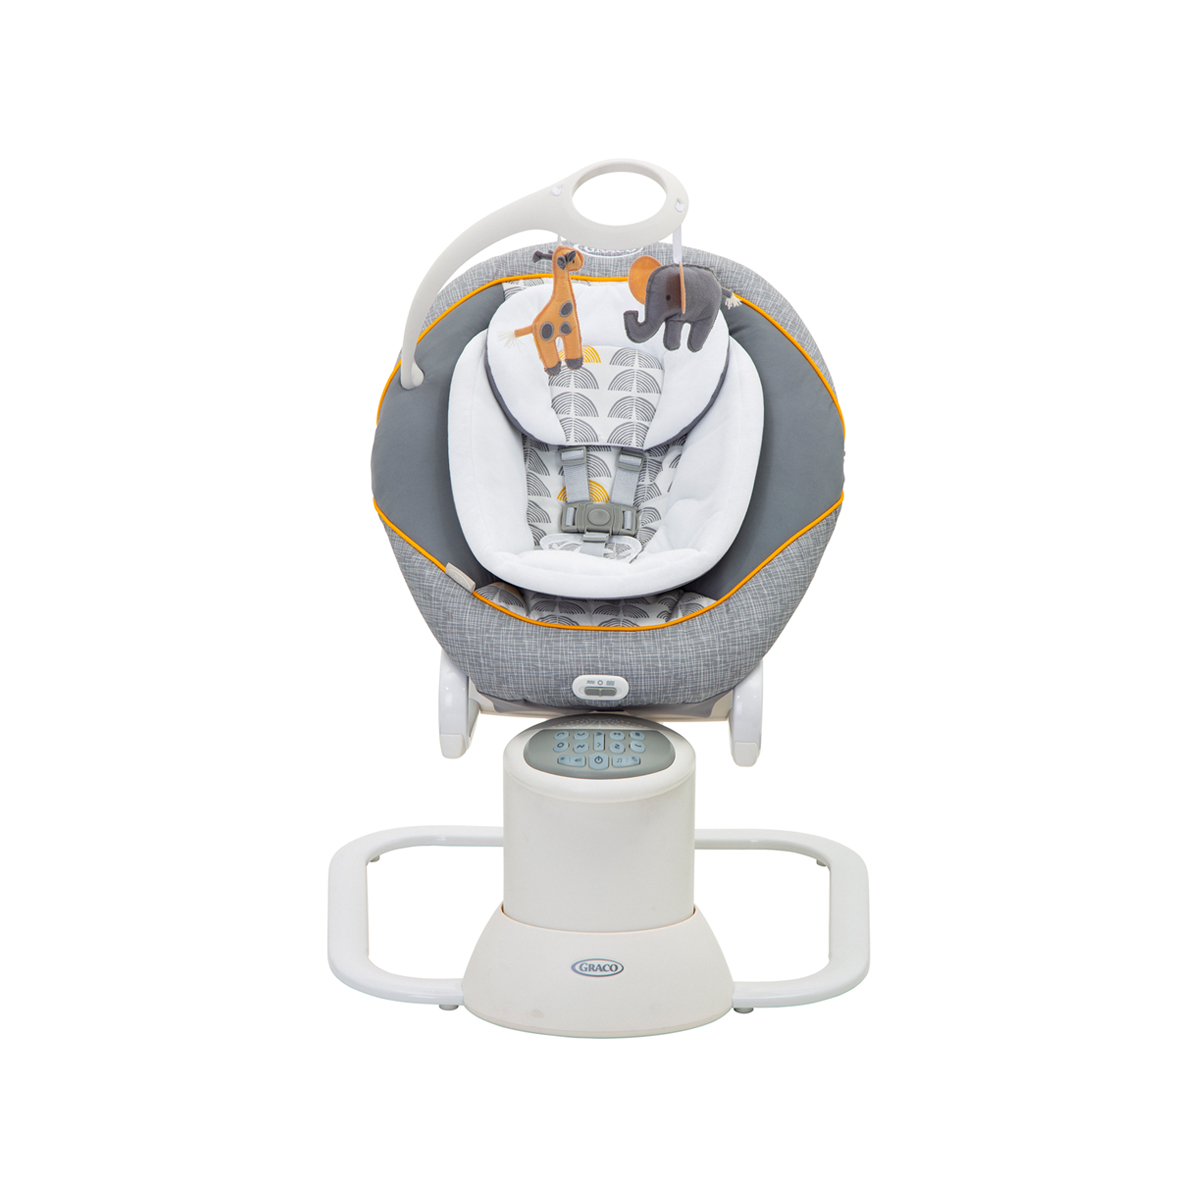 Graco All Ways™ soother front angle